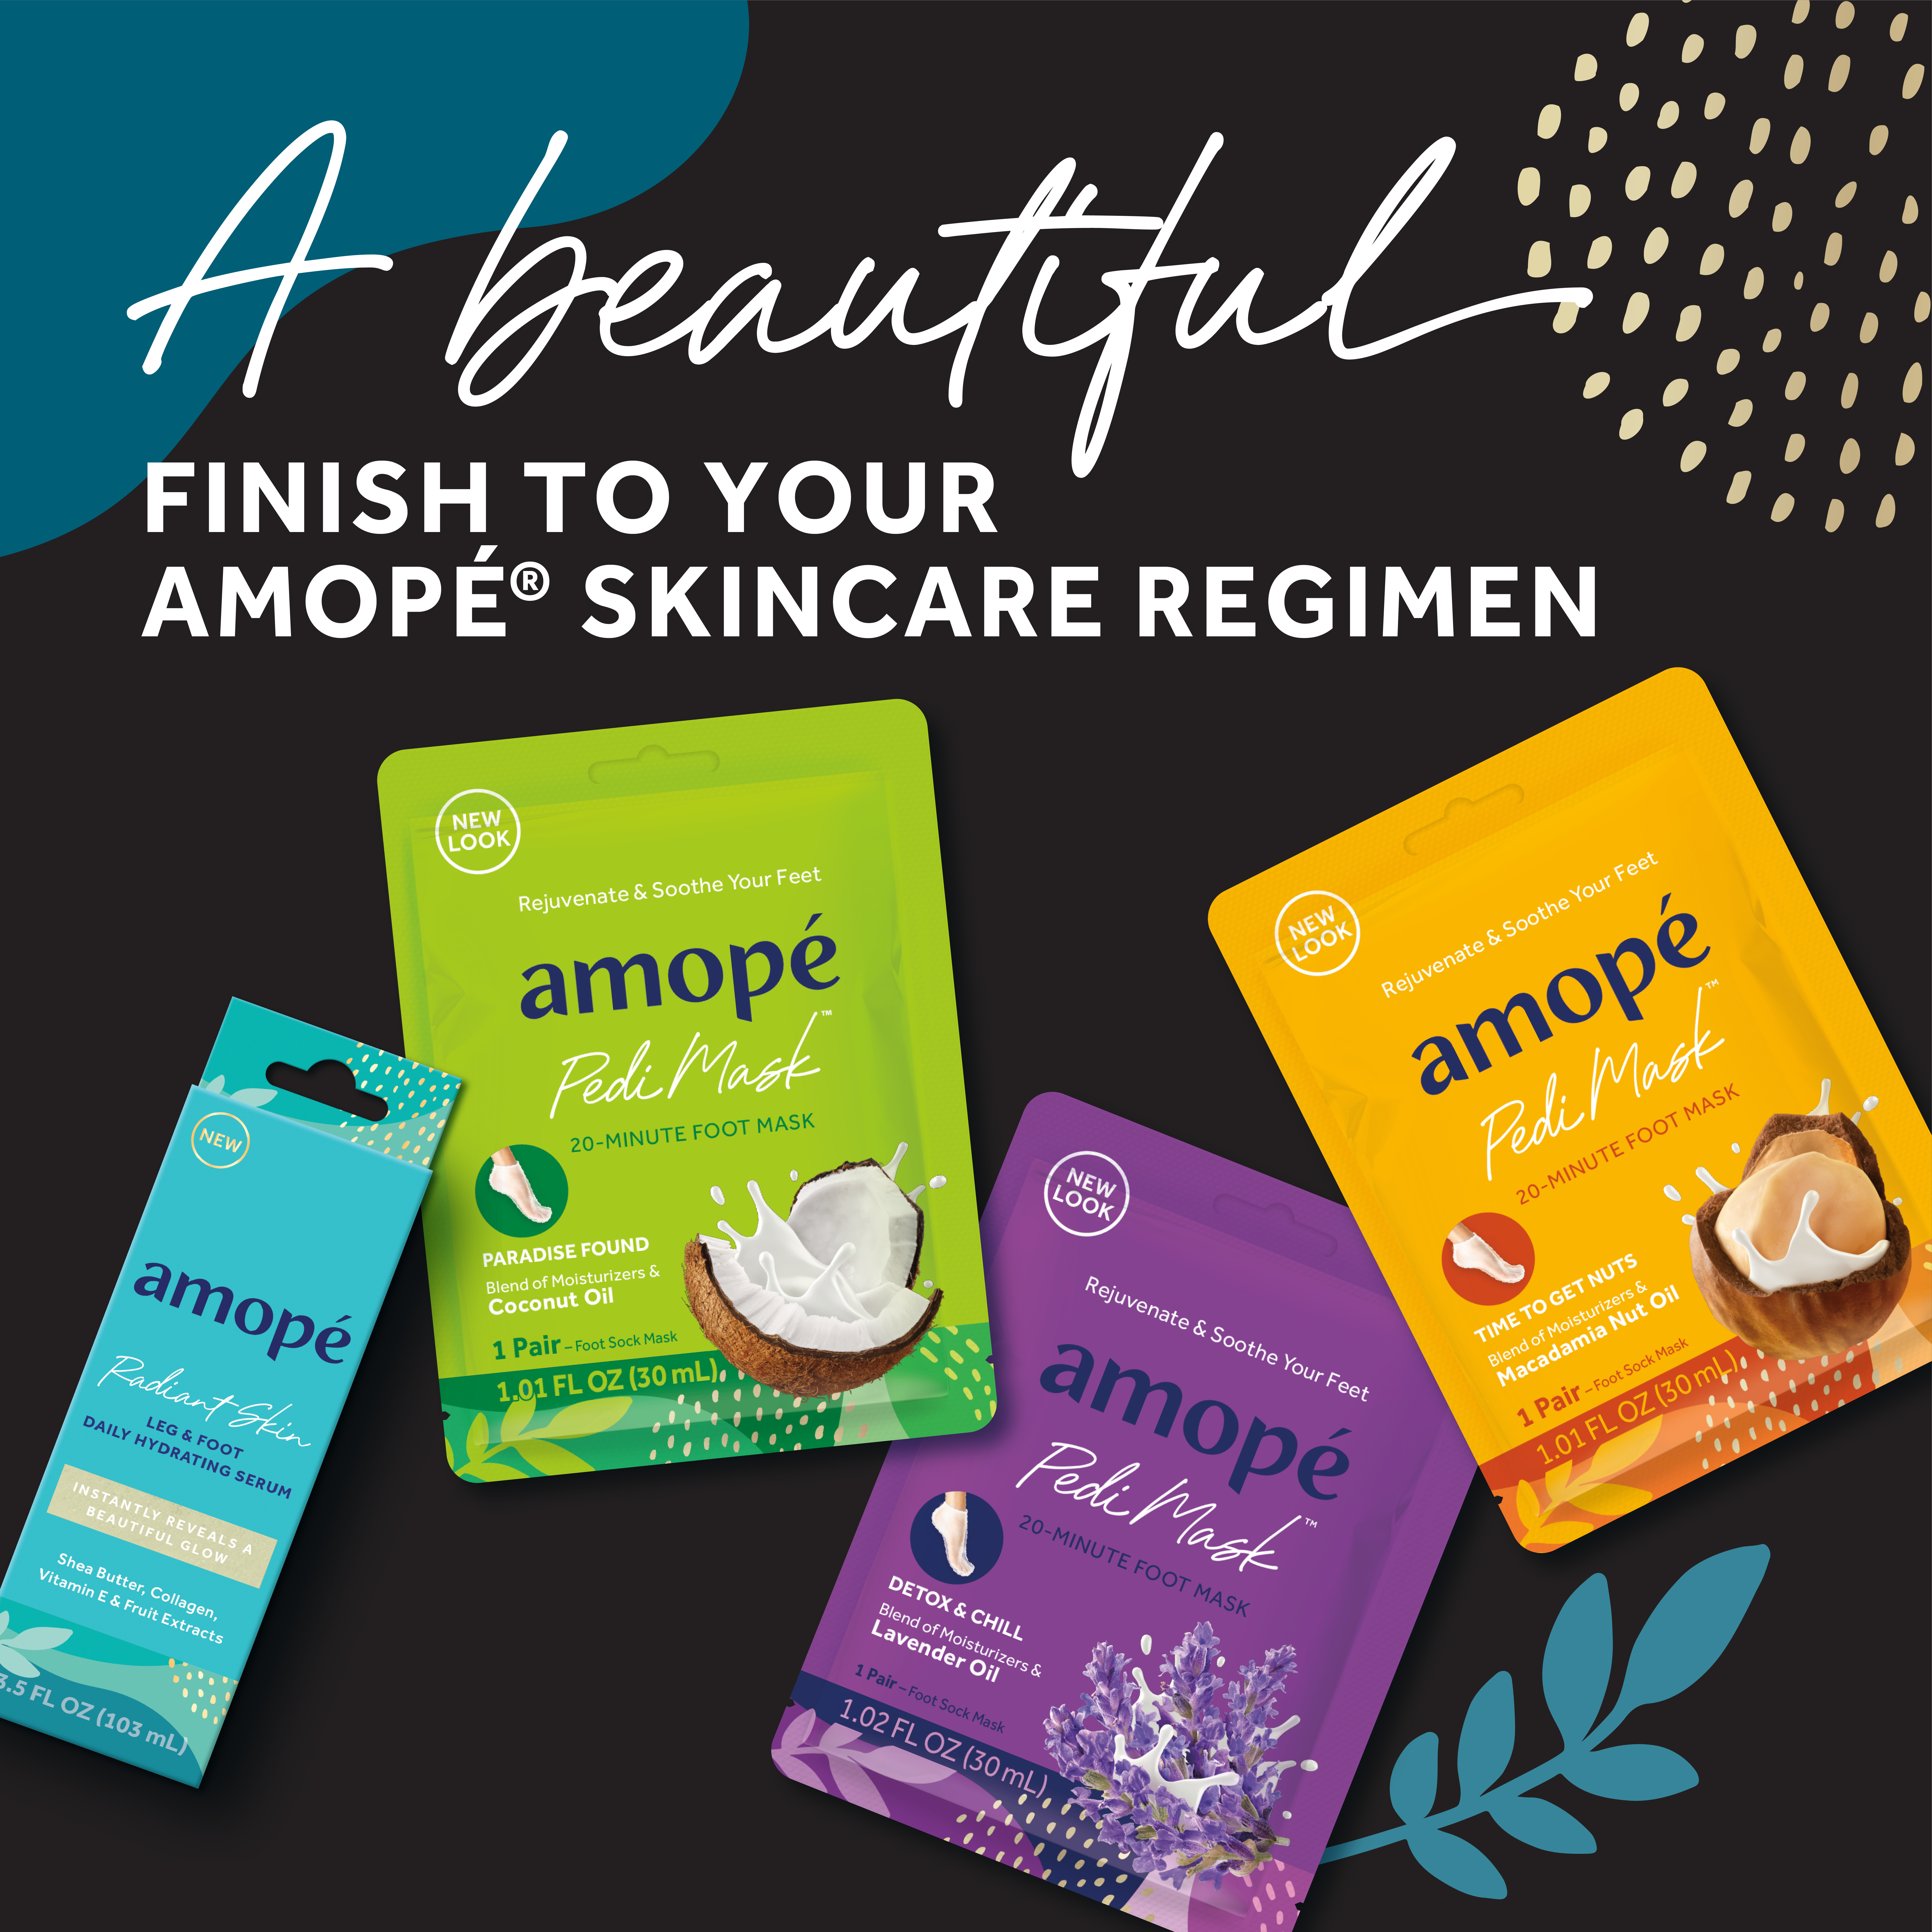 Amope Pedicure Value Kit, Spa Pampering Pack, self-care & Relaxation Gift, Contains Pedi Perfect Electric Callus Remover Foot File, 2 Macadamia Oil